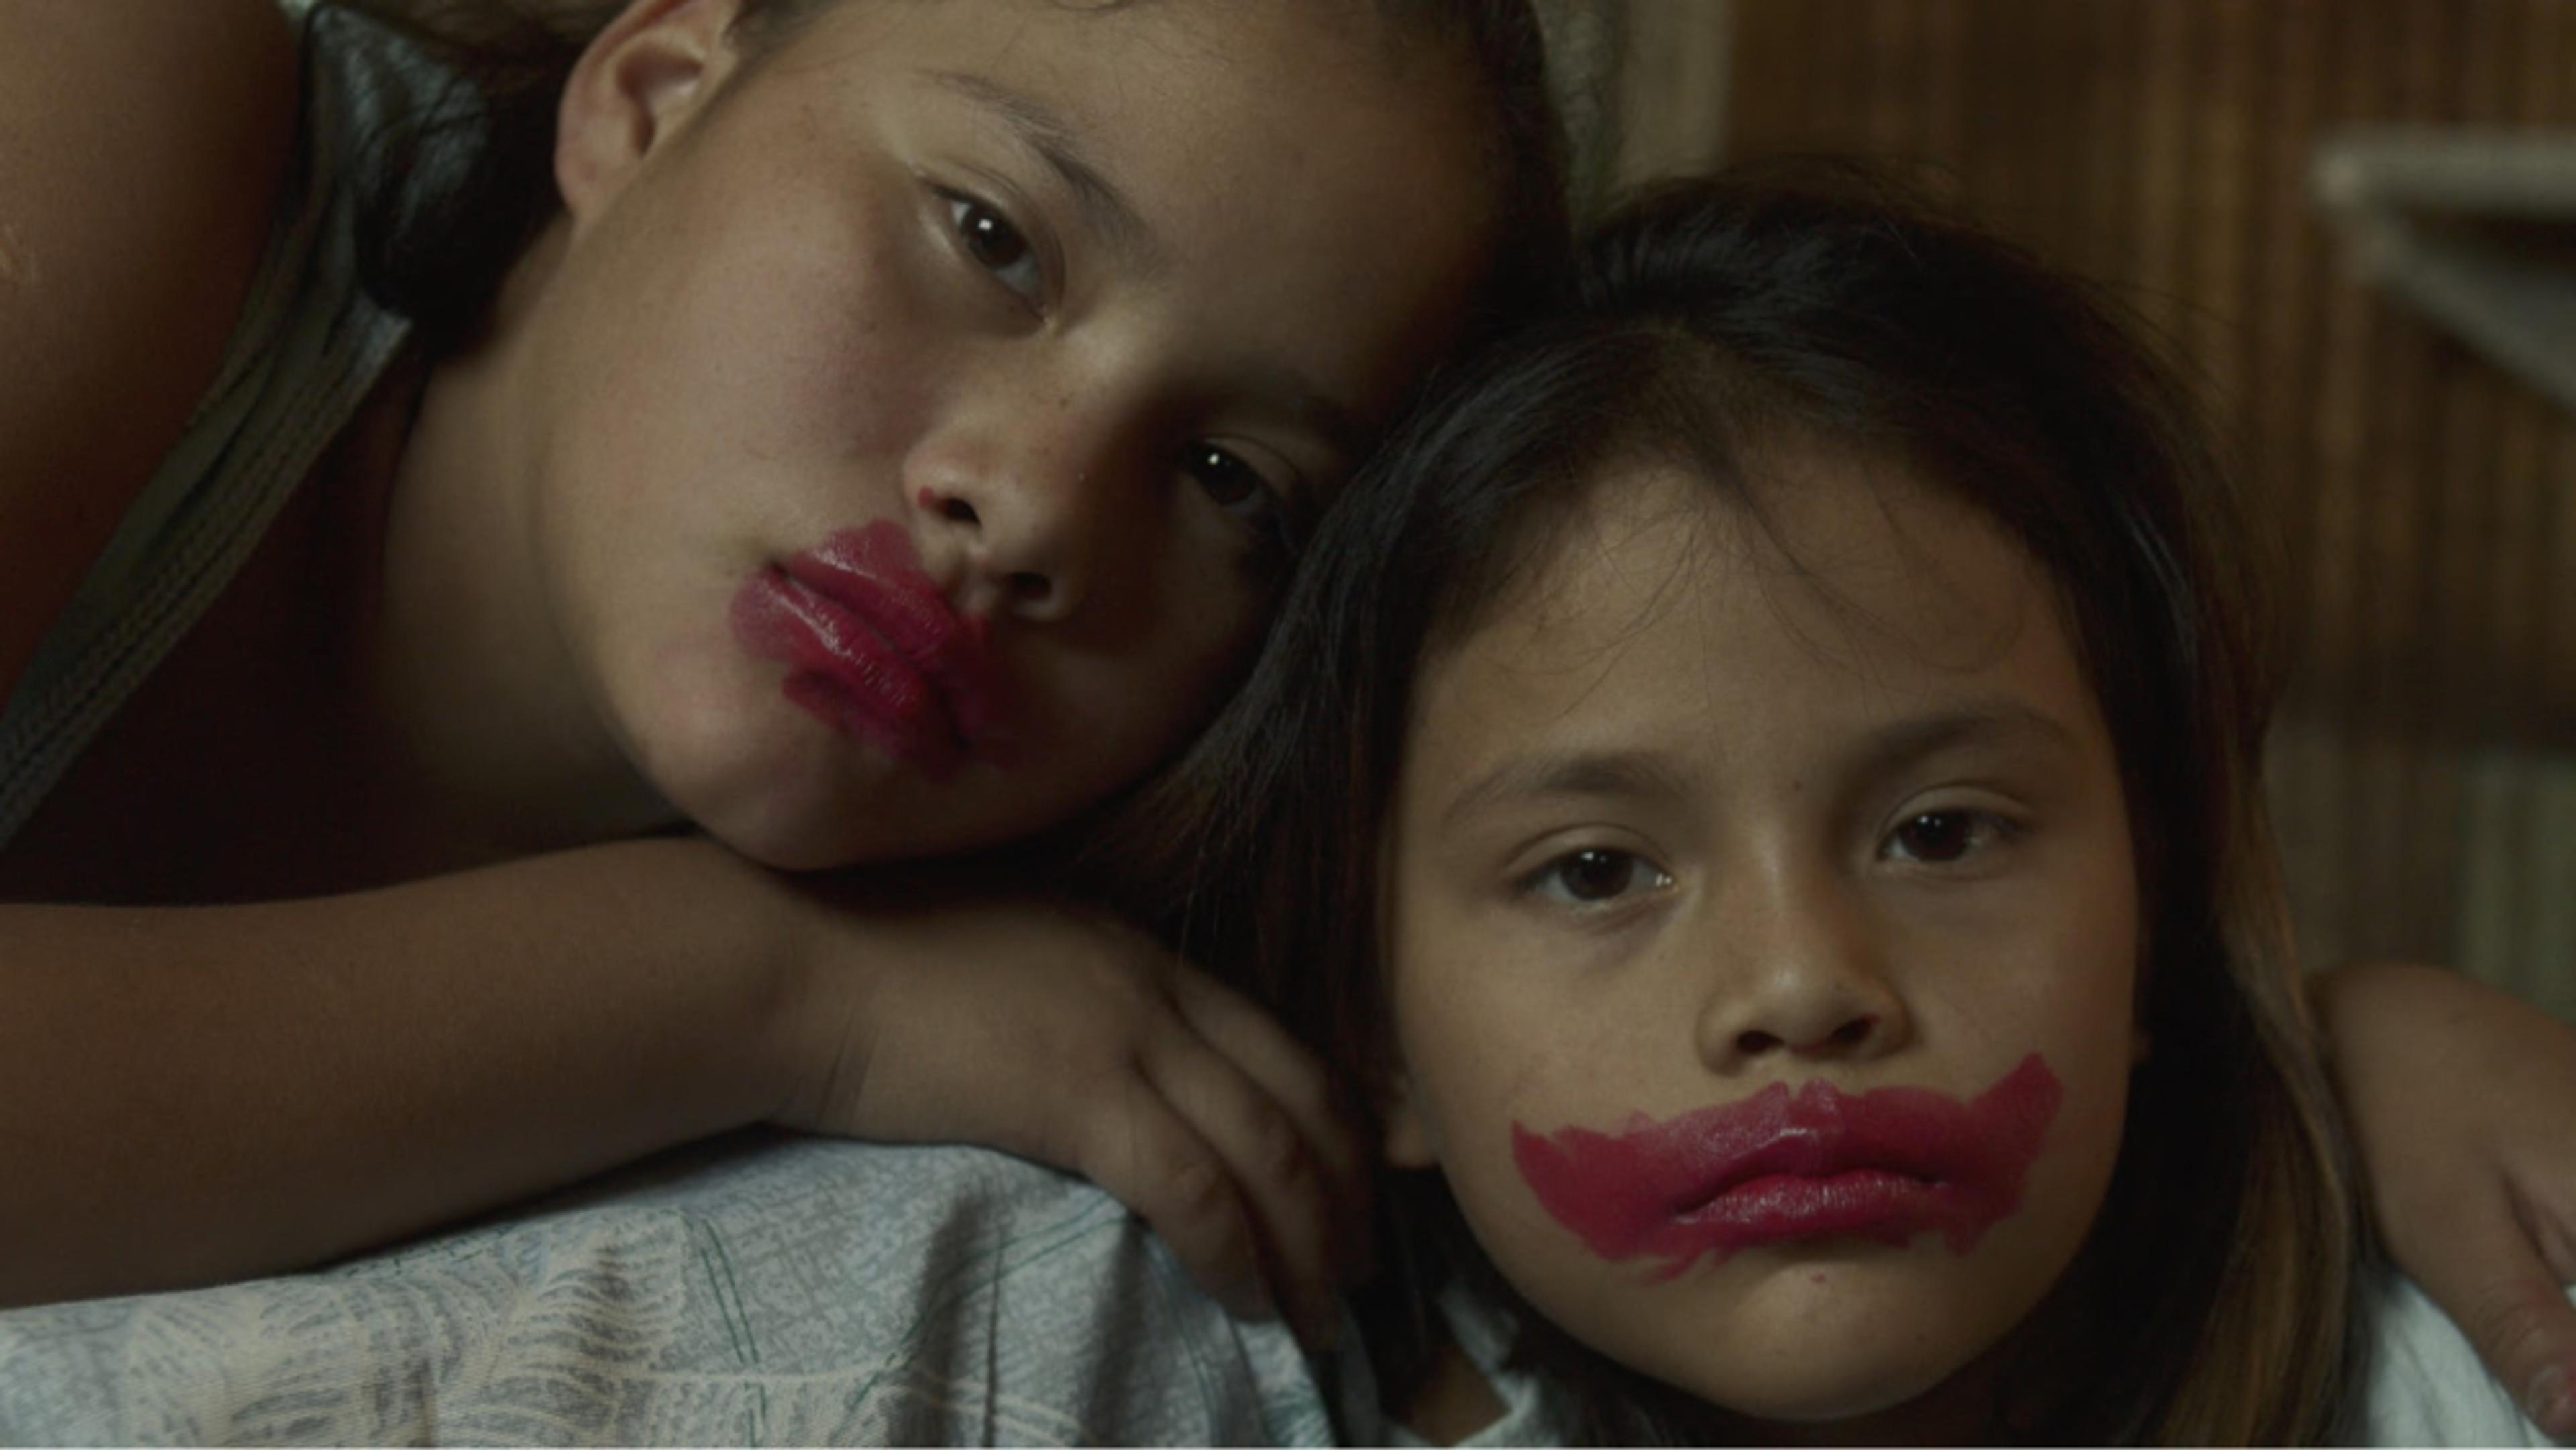 Two kids with lipstic on their lips looking directly to the camera. 